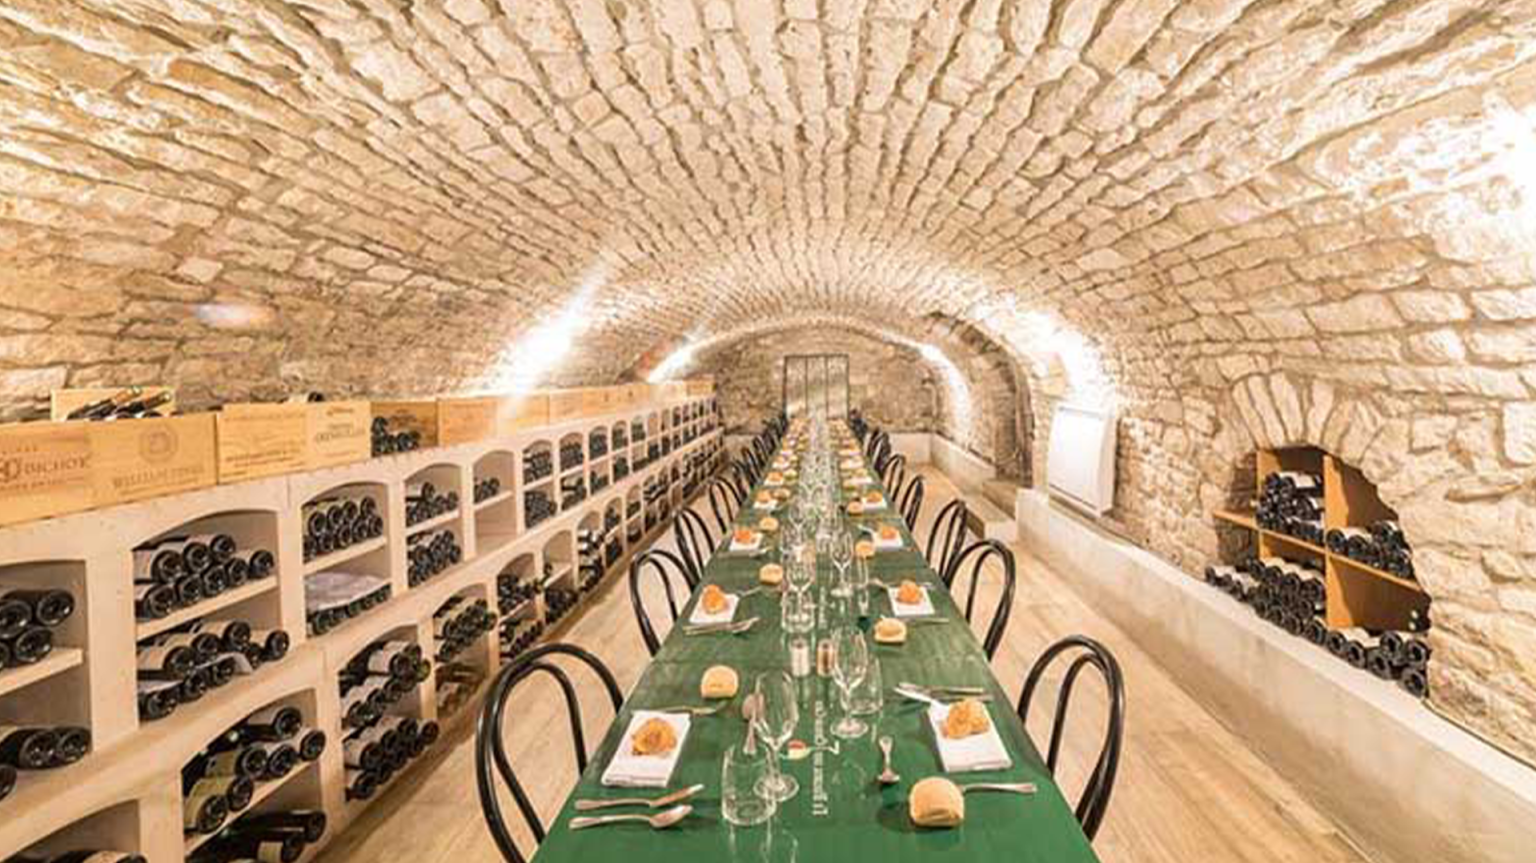 Dining out in Chablis: 3 restaurant recommendations for wine lovers